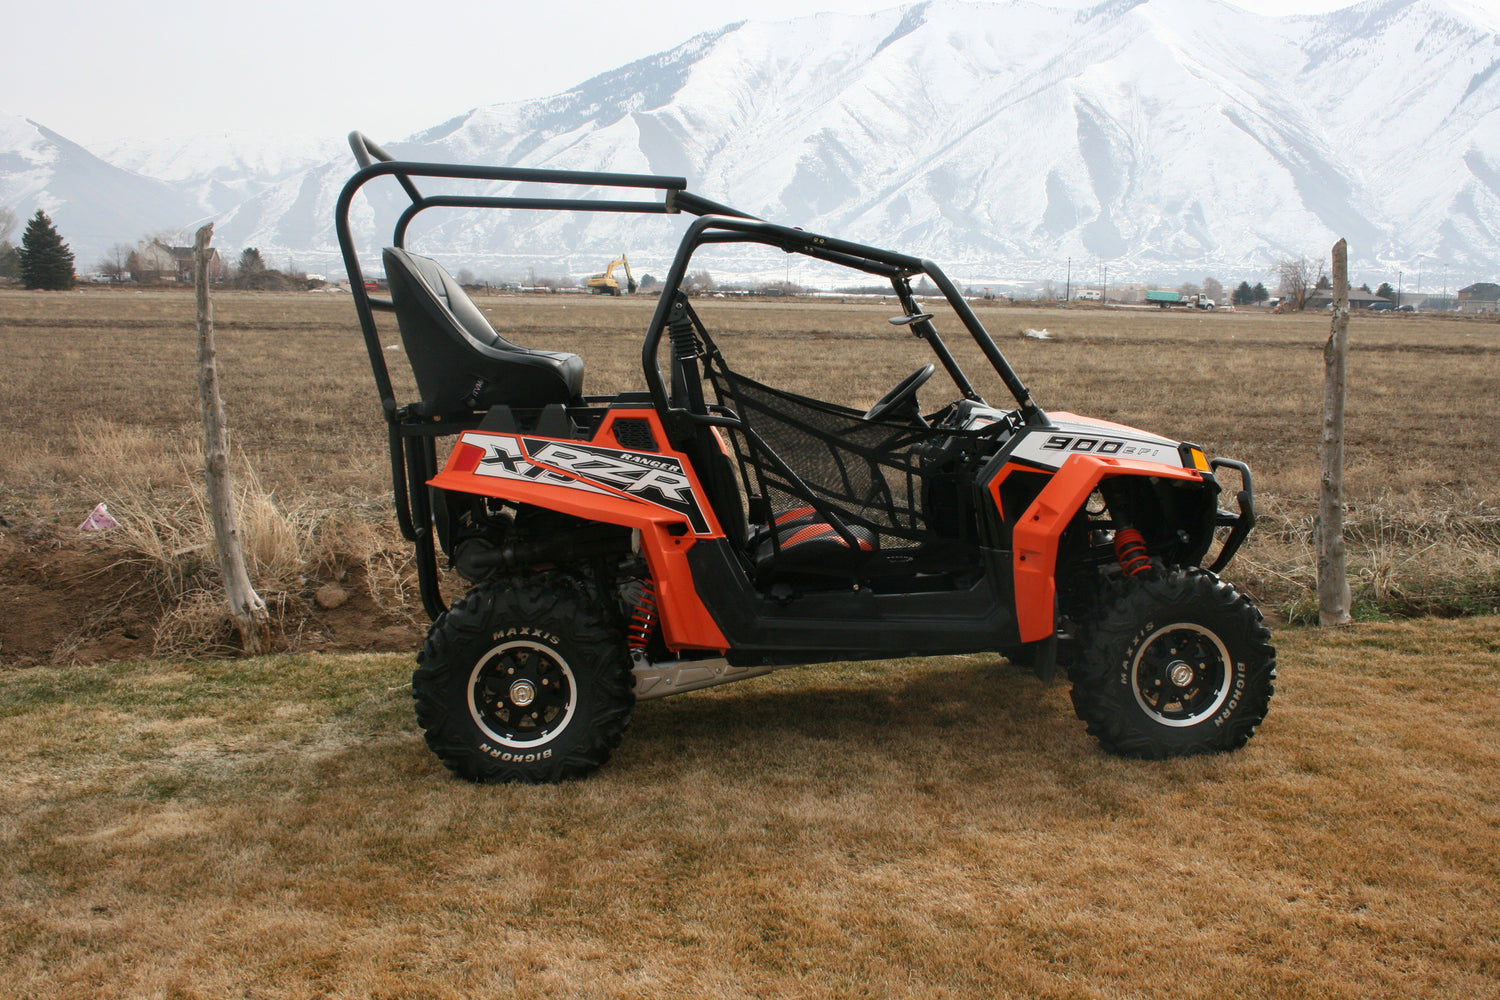 RZR 900 Backseat Roll Cage Kit (2011-2014)